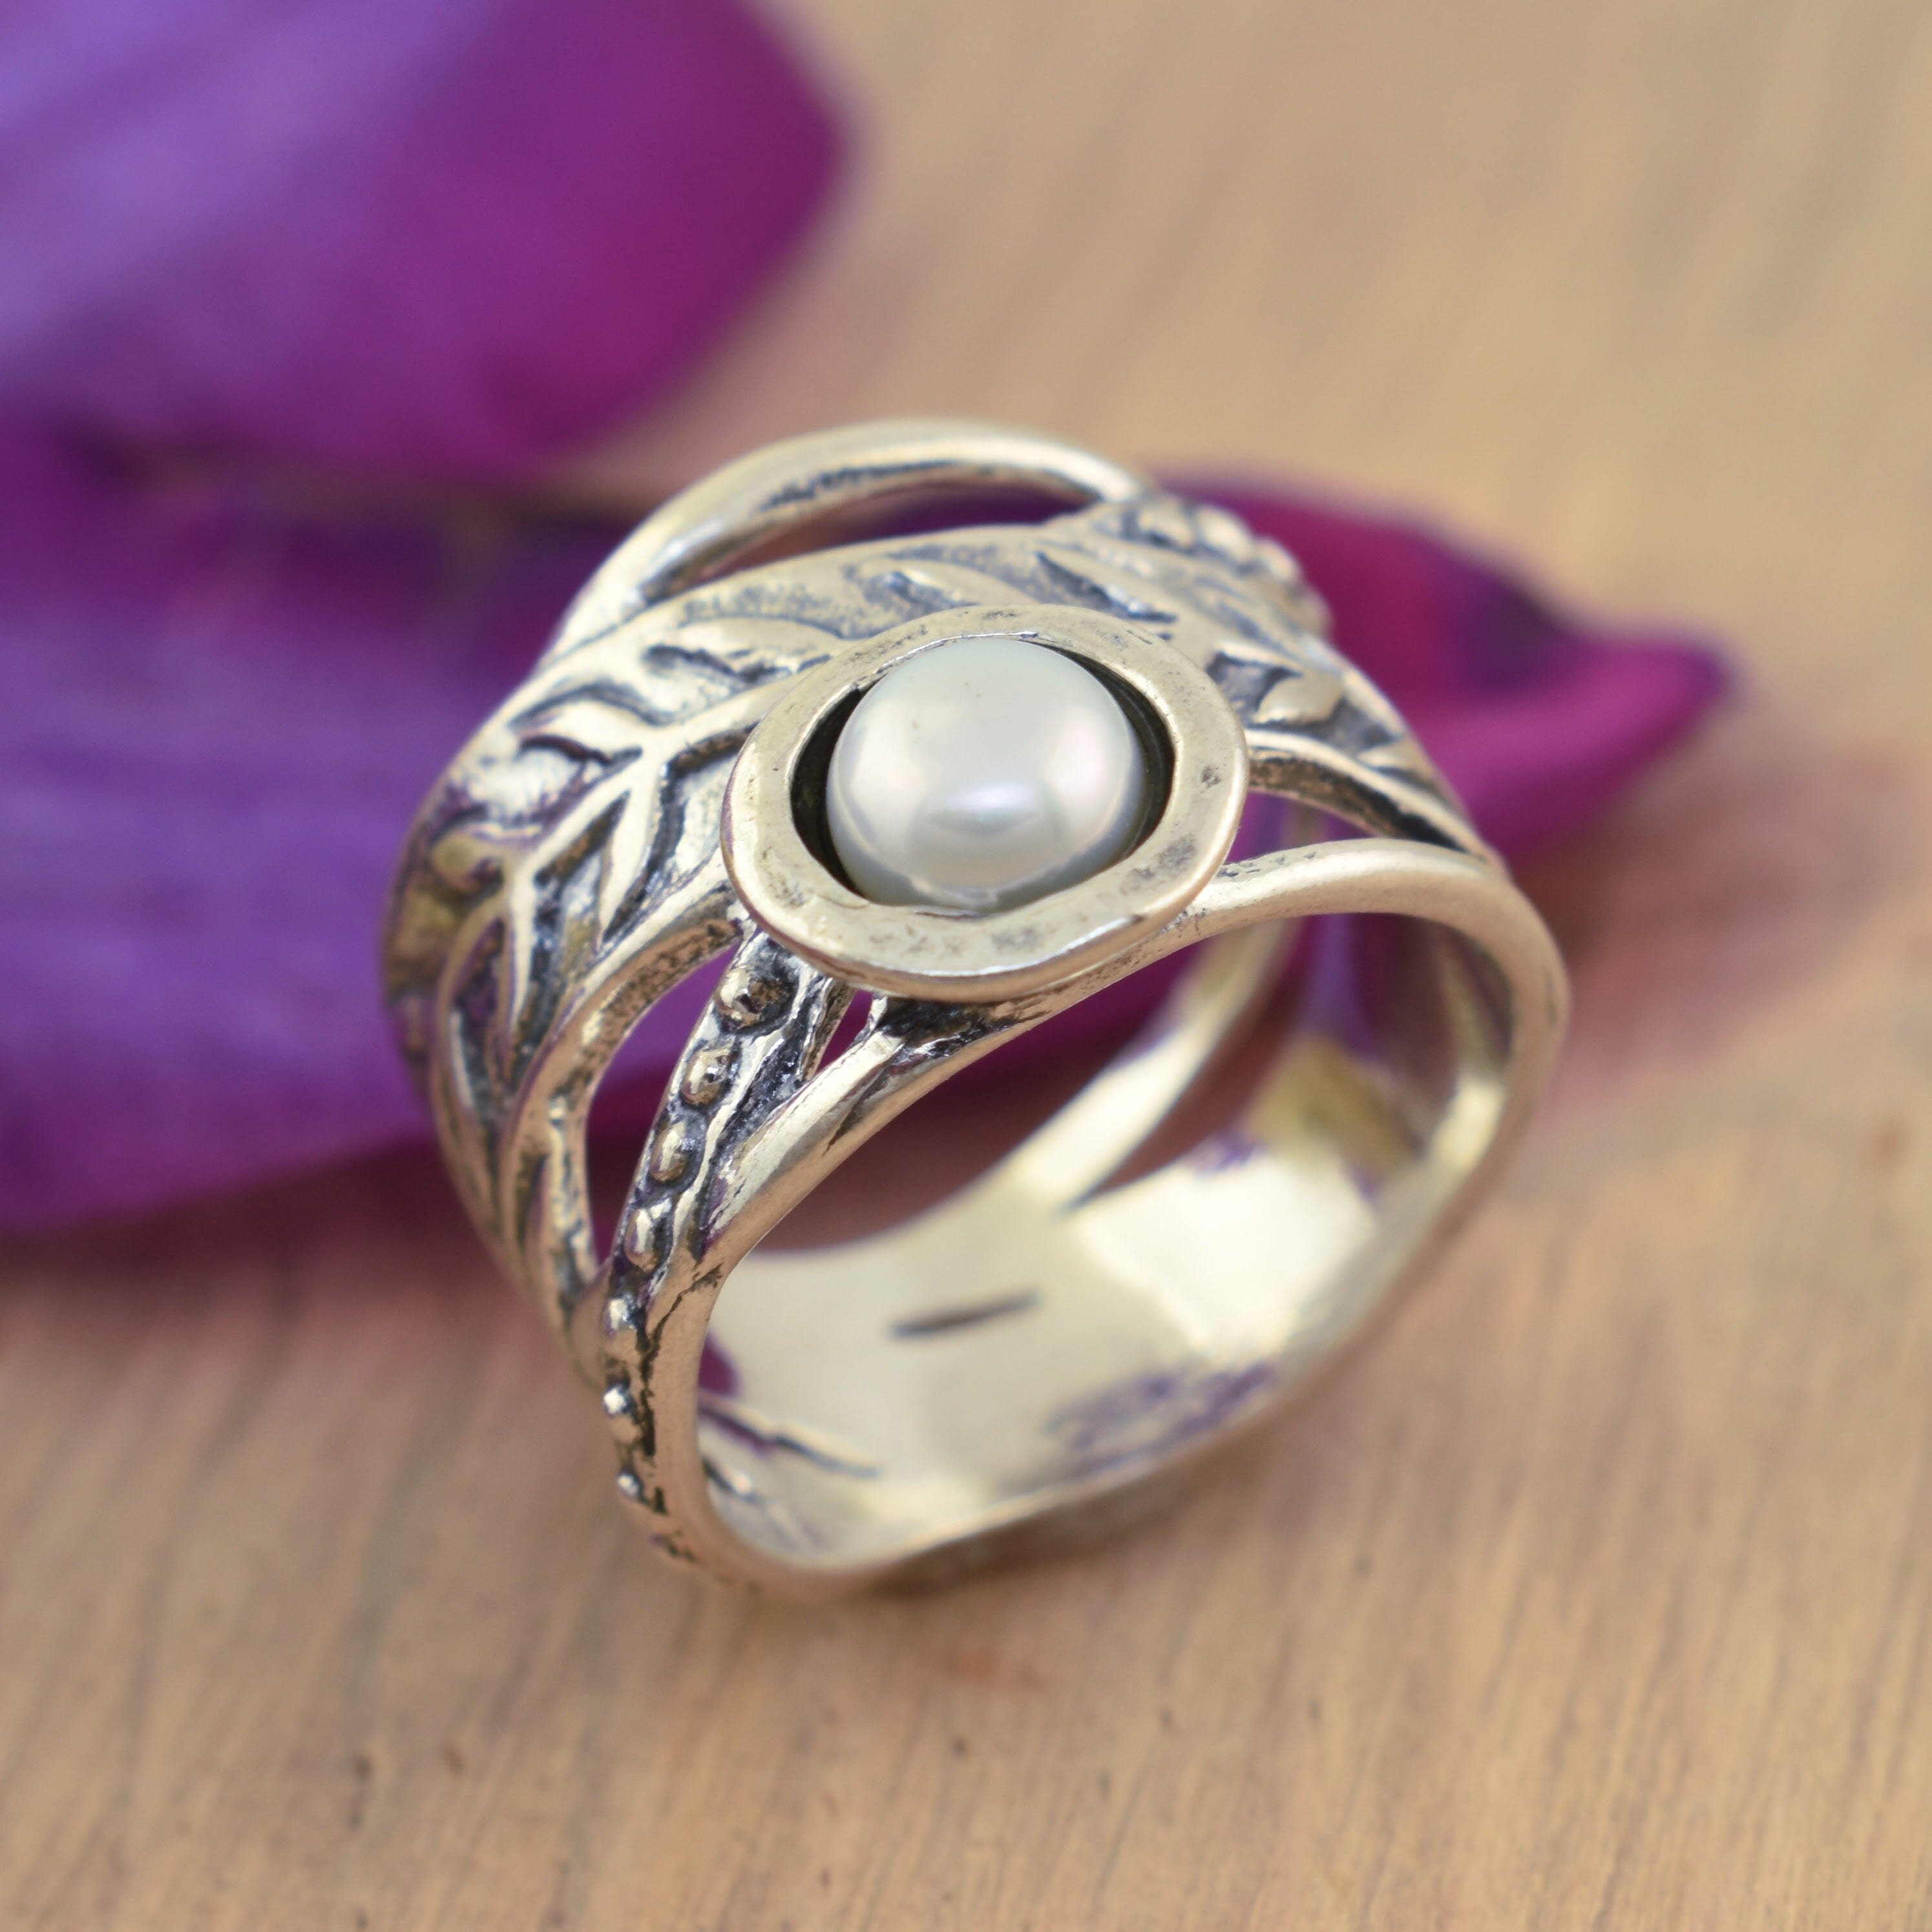 Freshwater pearl ring set in .925 sterling silver wind band ring